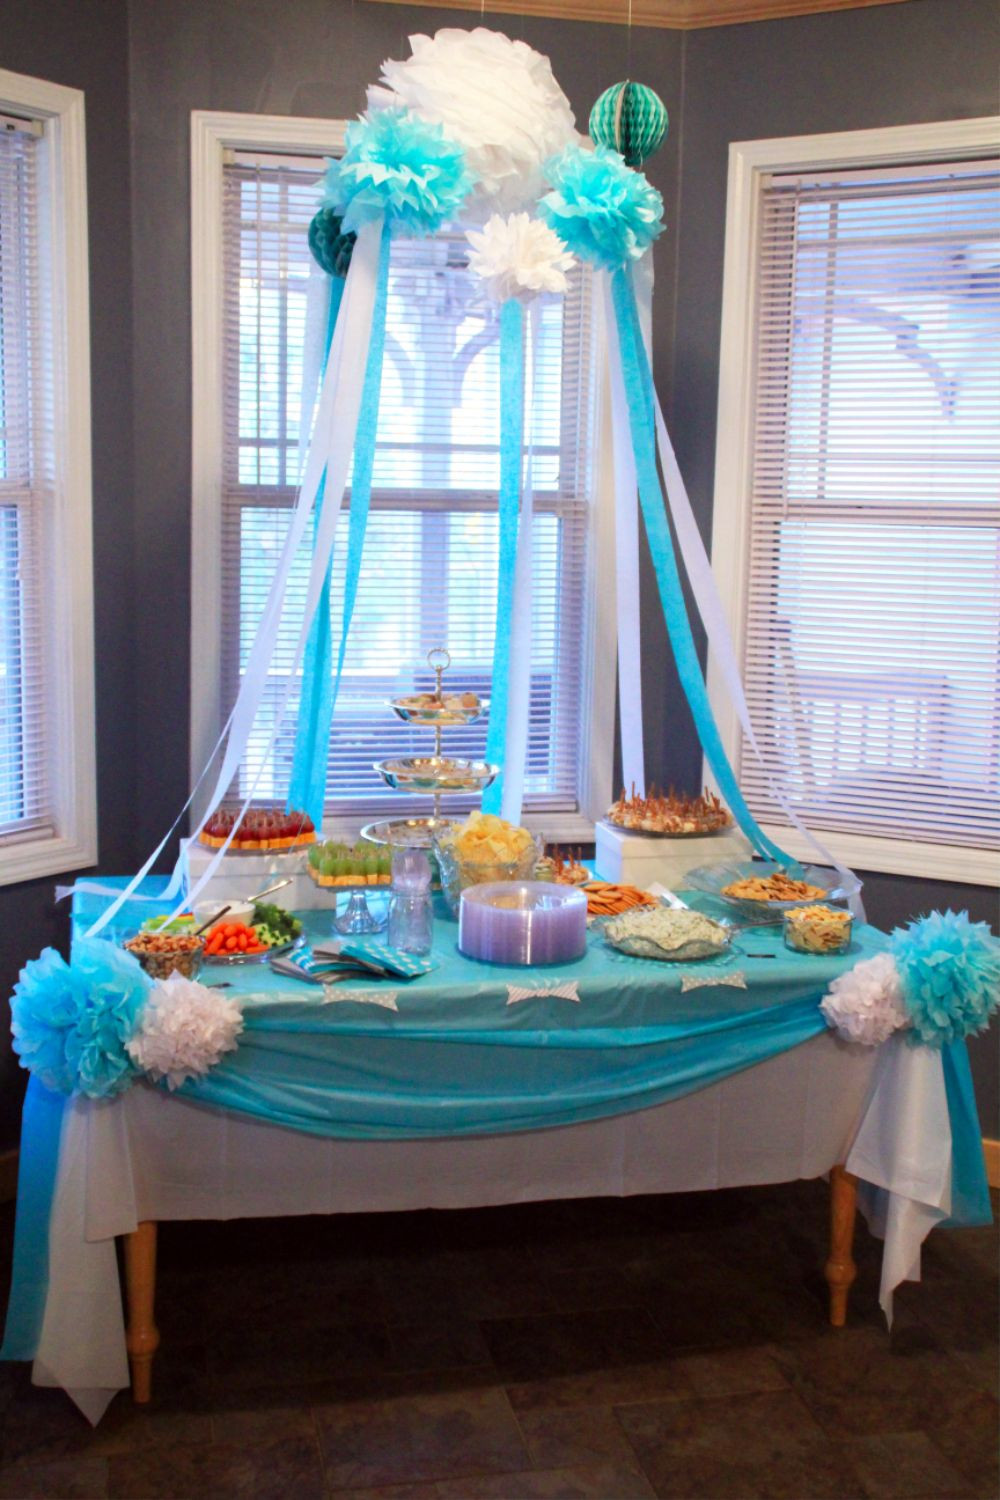 Decoration Ideas For Baby Shower
 Baby Shower Decoration Ideas Southern Couture